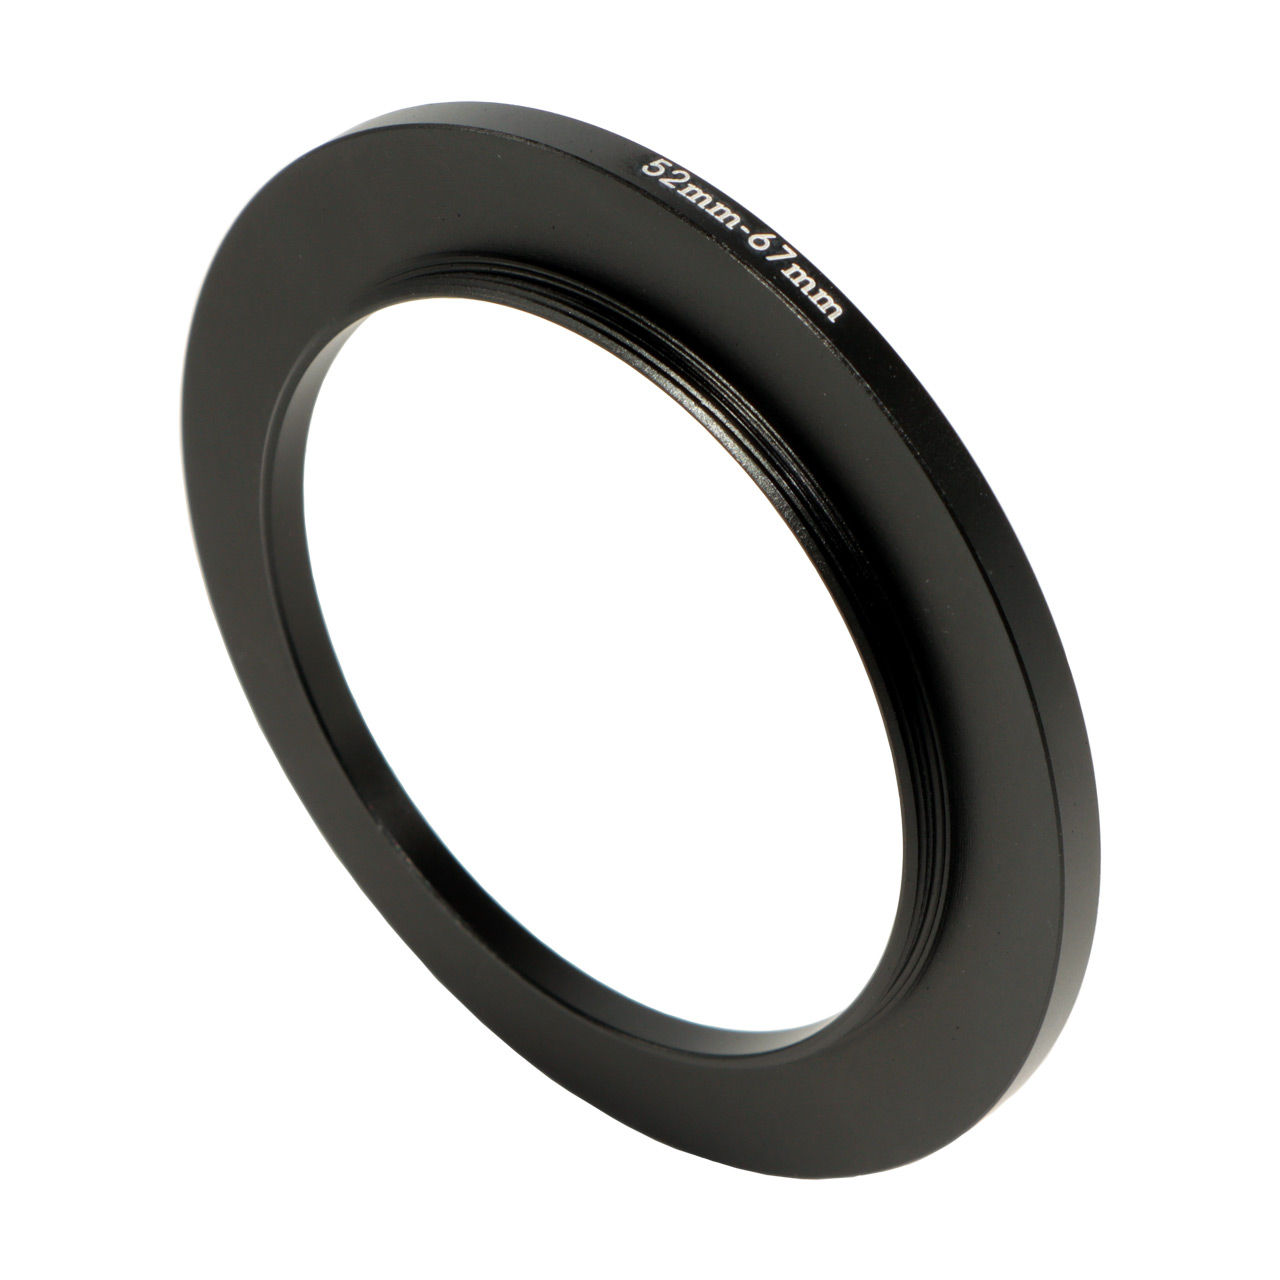 HYPERION Step Up Ring 52-67mm